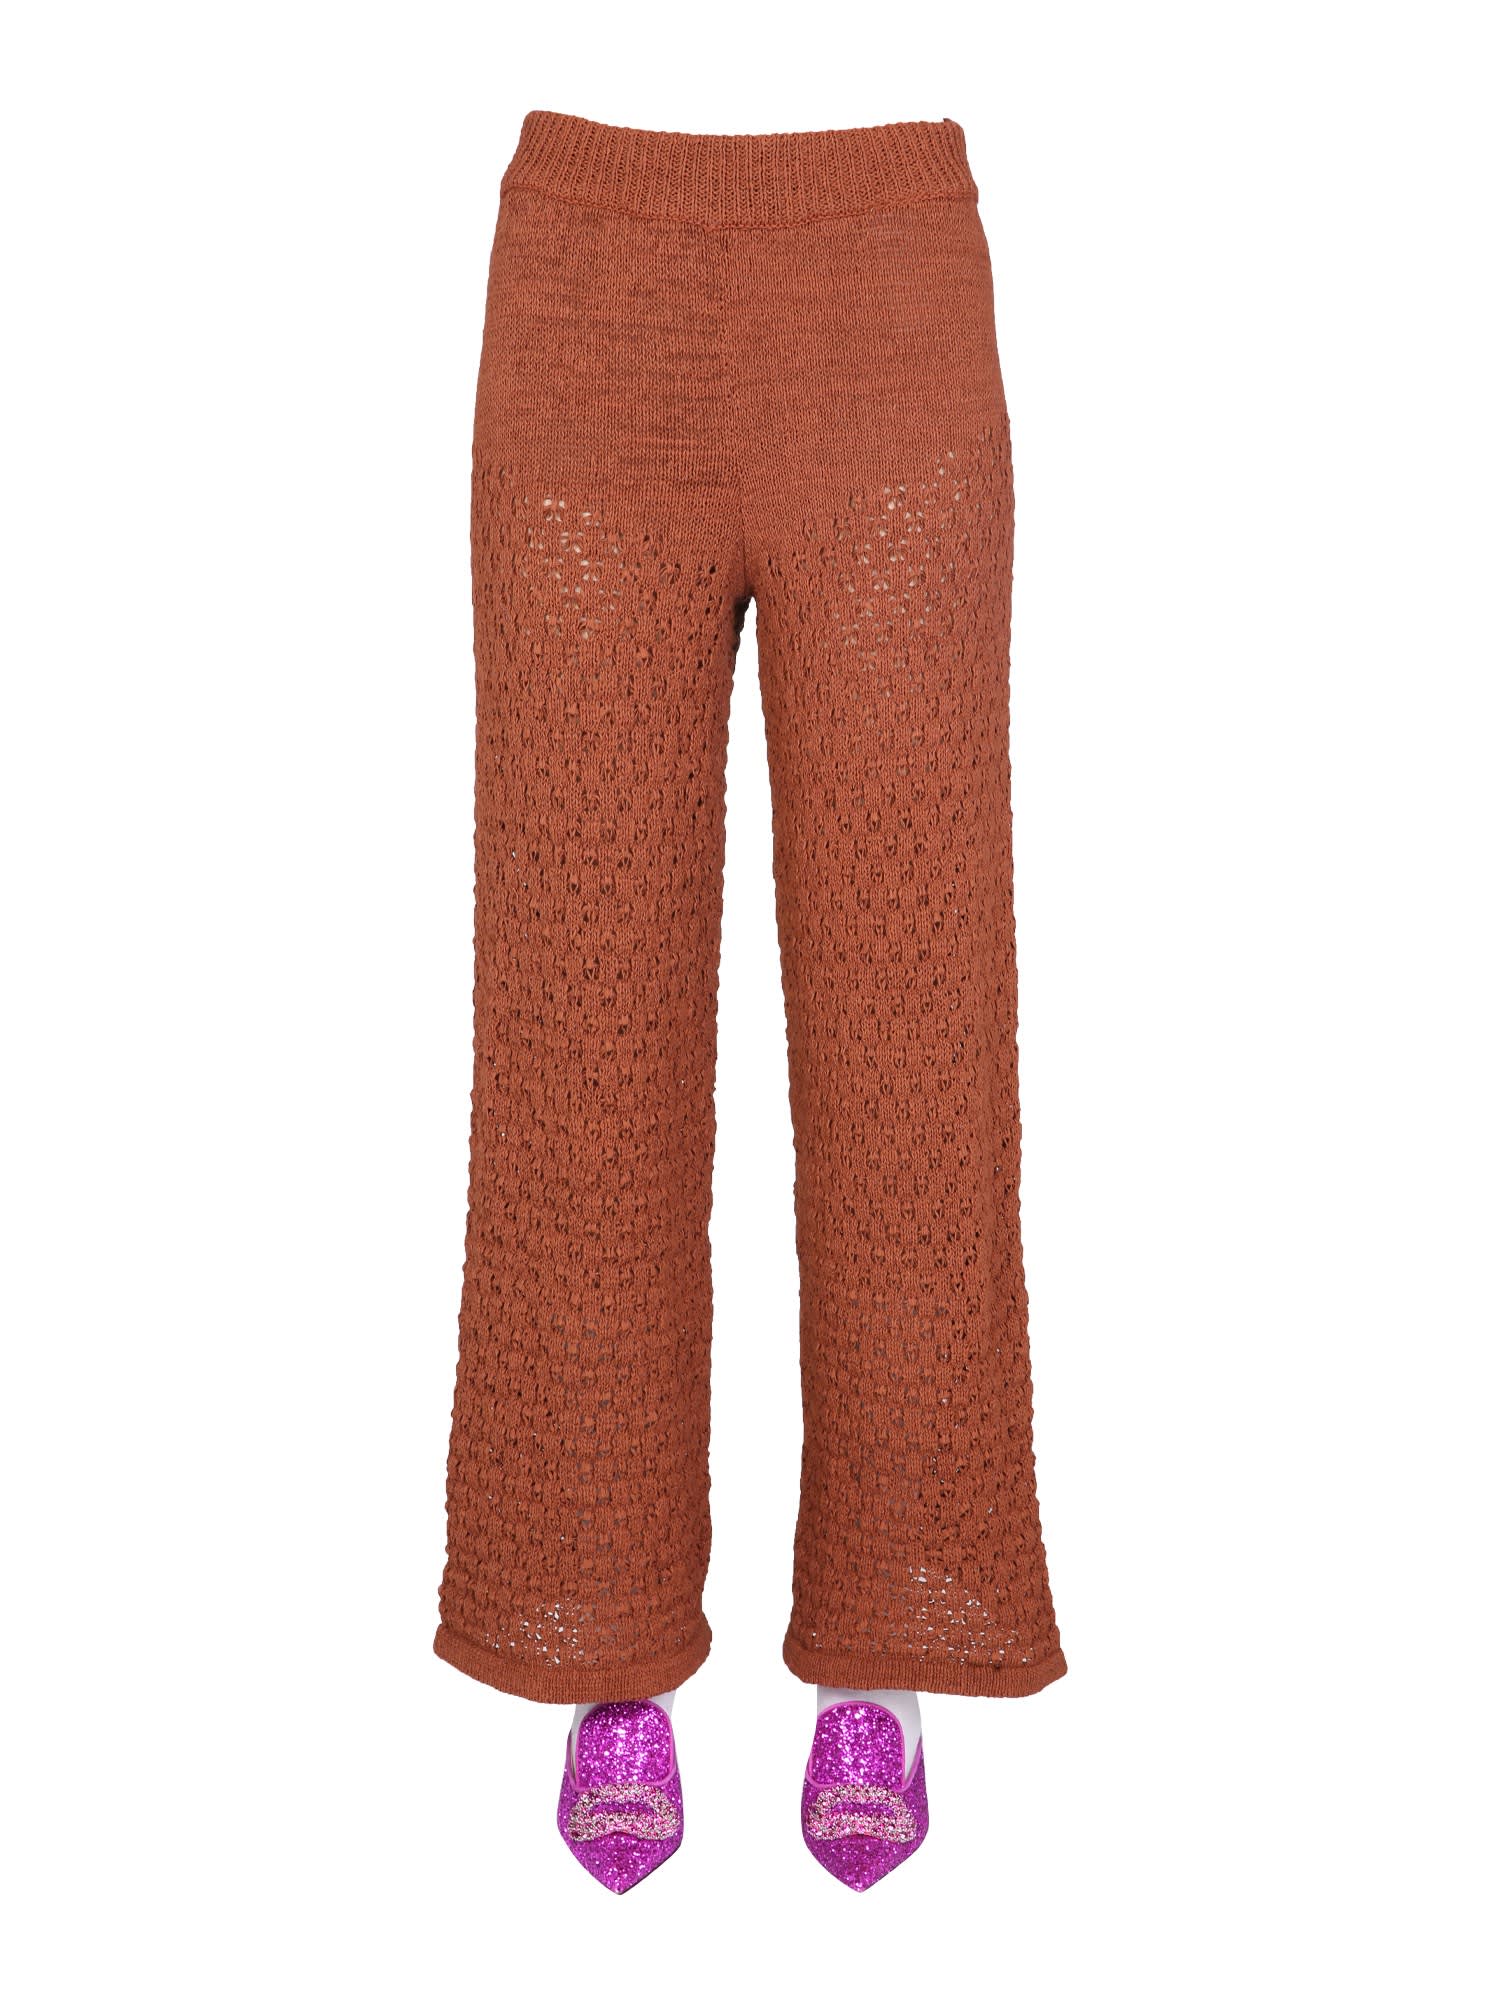 Rotate by Birger Christensen Calla Knit Trousers